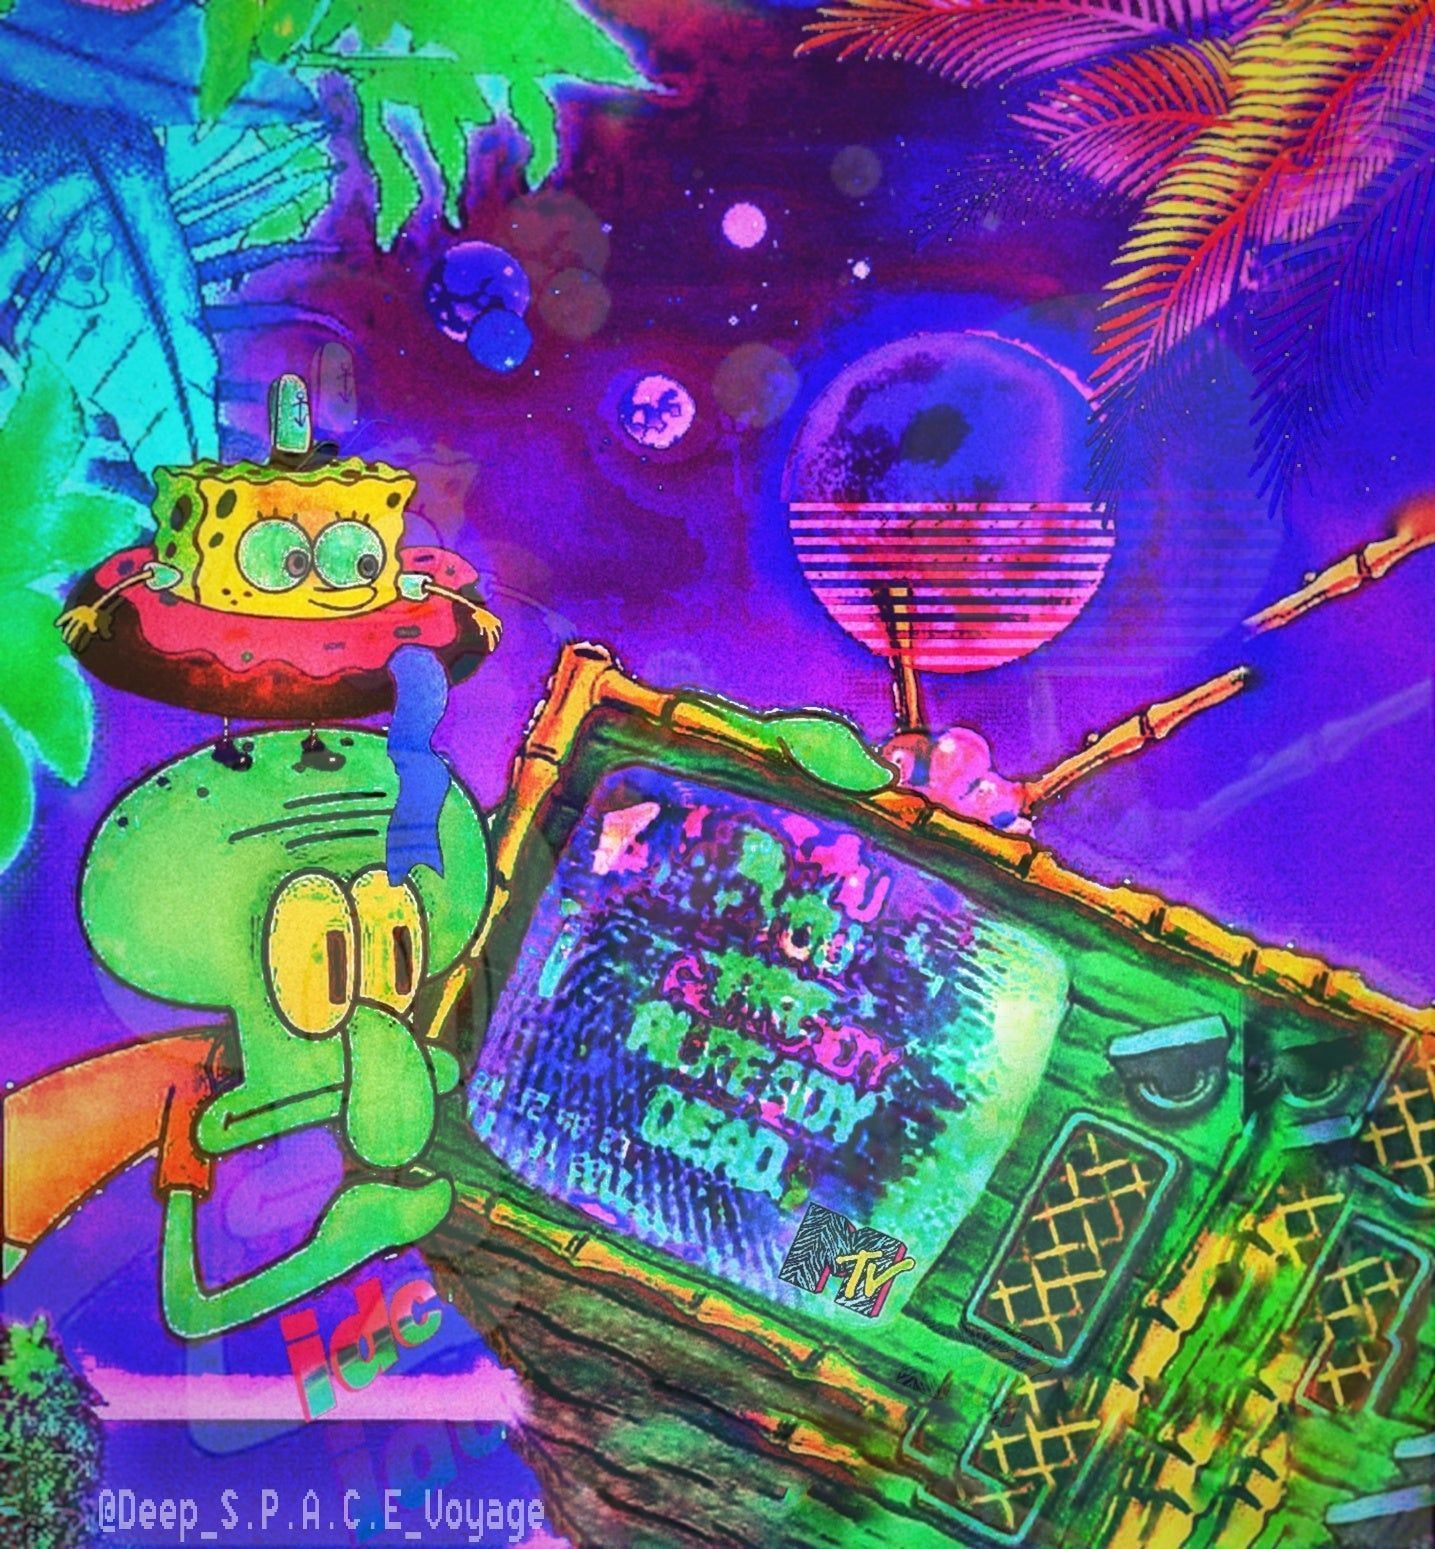 A painting of spongebob and his friends in front - Squidward